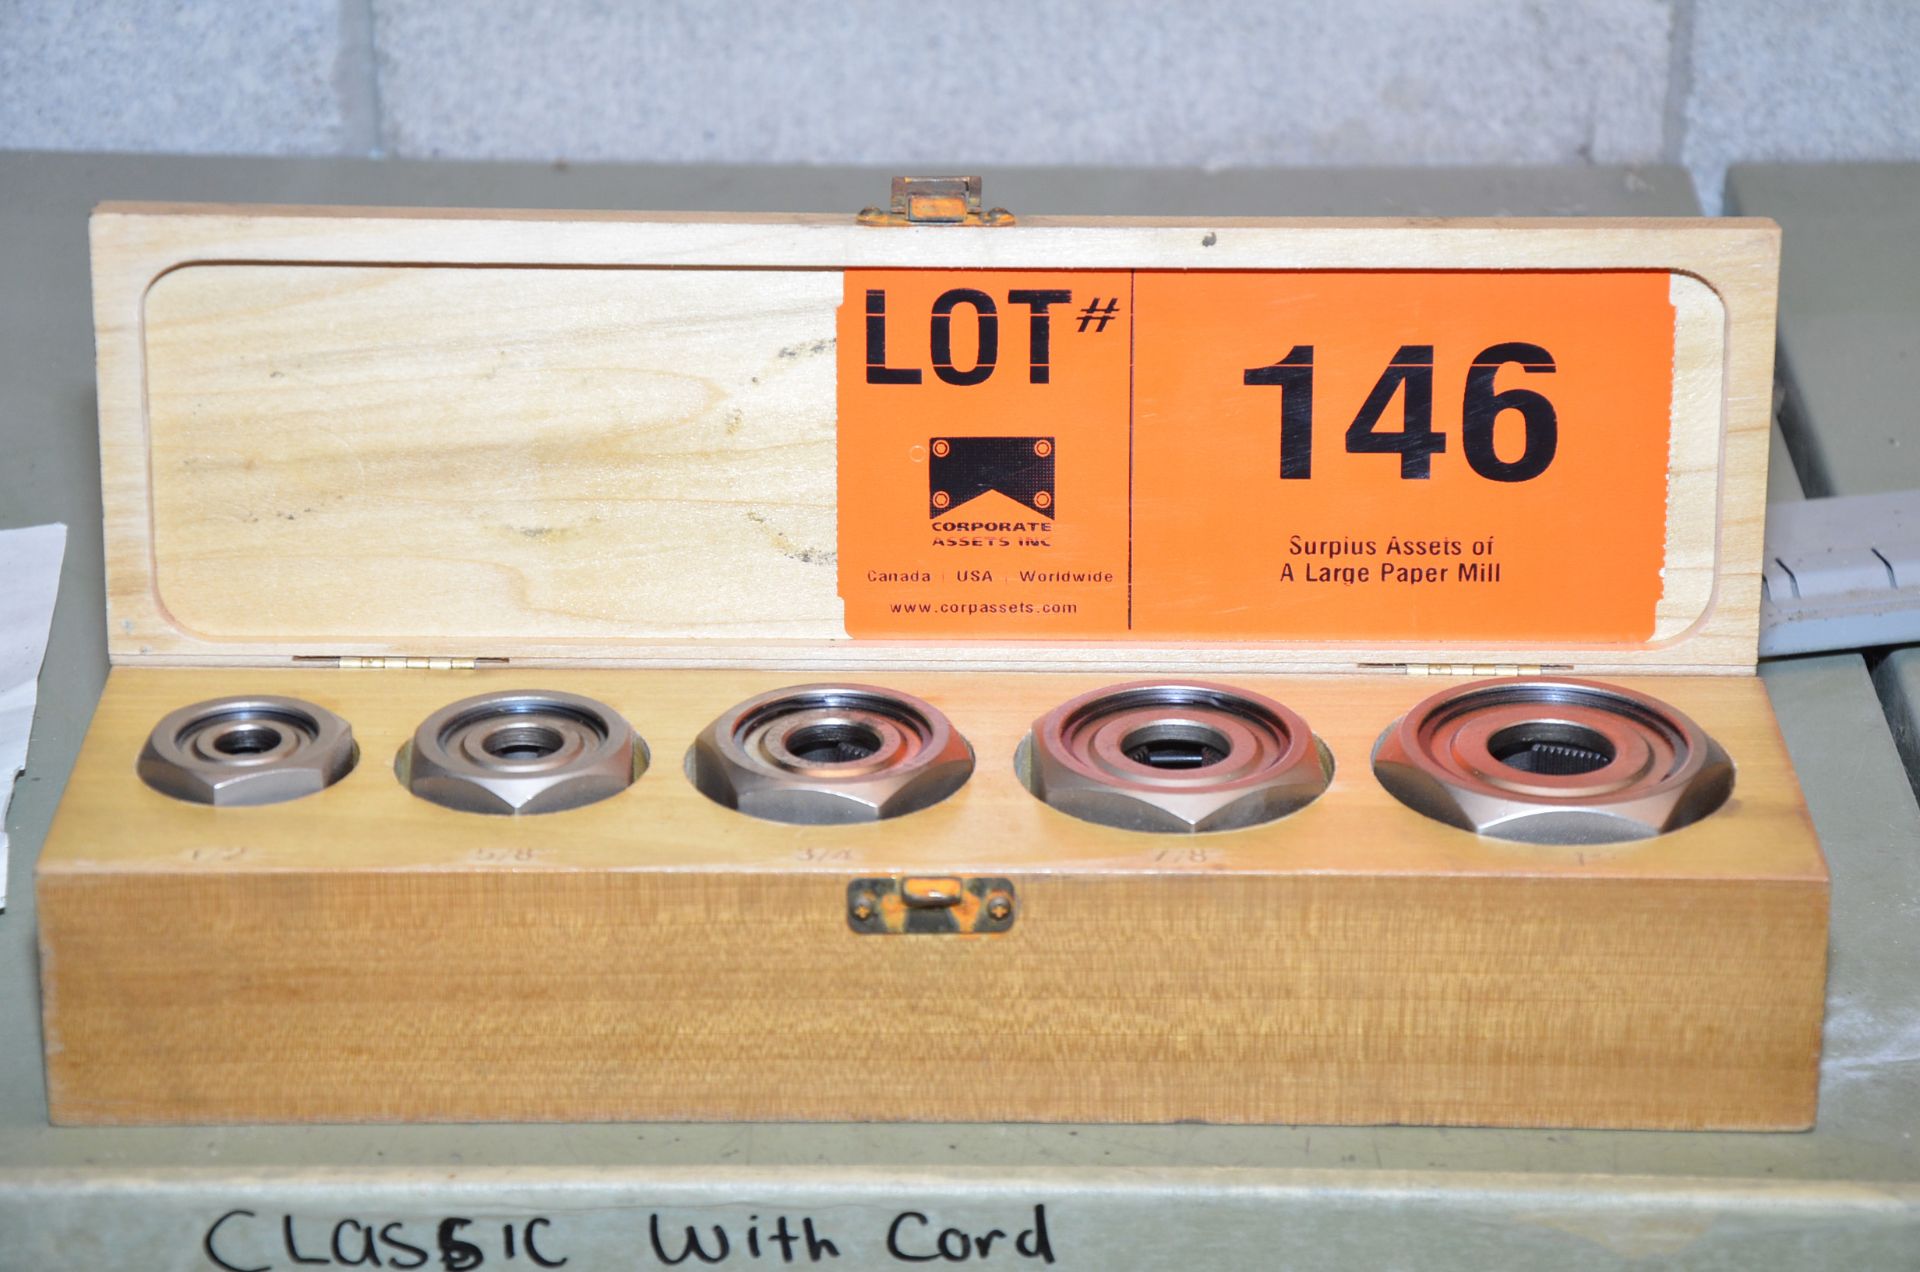 SET OF IDT PRECISION THREADING DIES 1/2"-1" [RIGGING FEE FOR LOT #146 - $TBD USD PLUS APPLICABLE